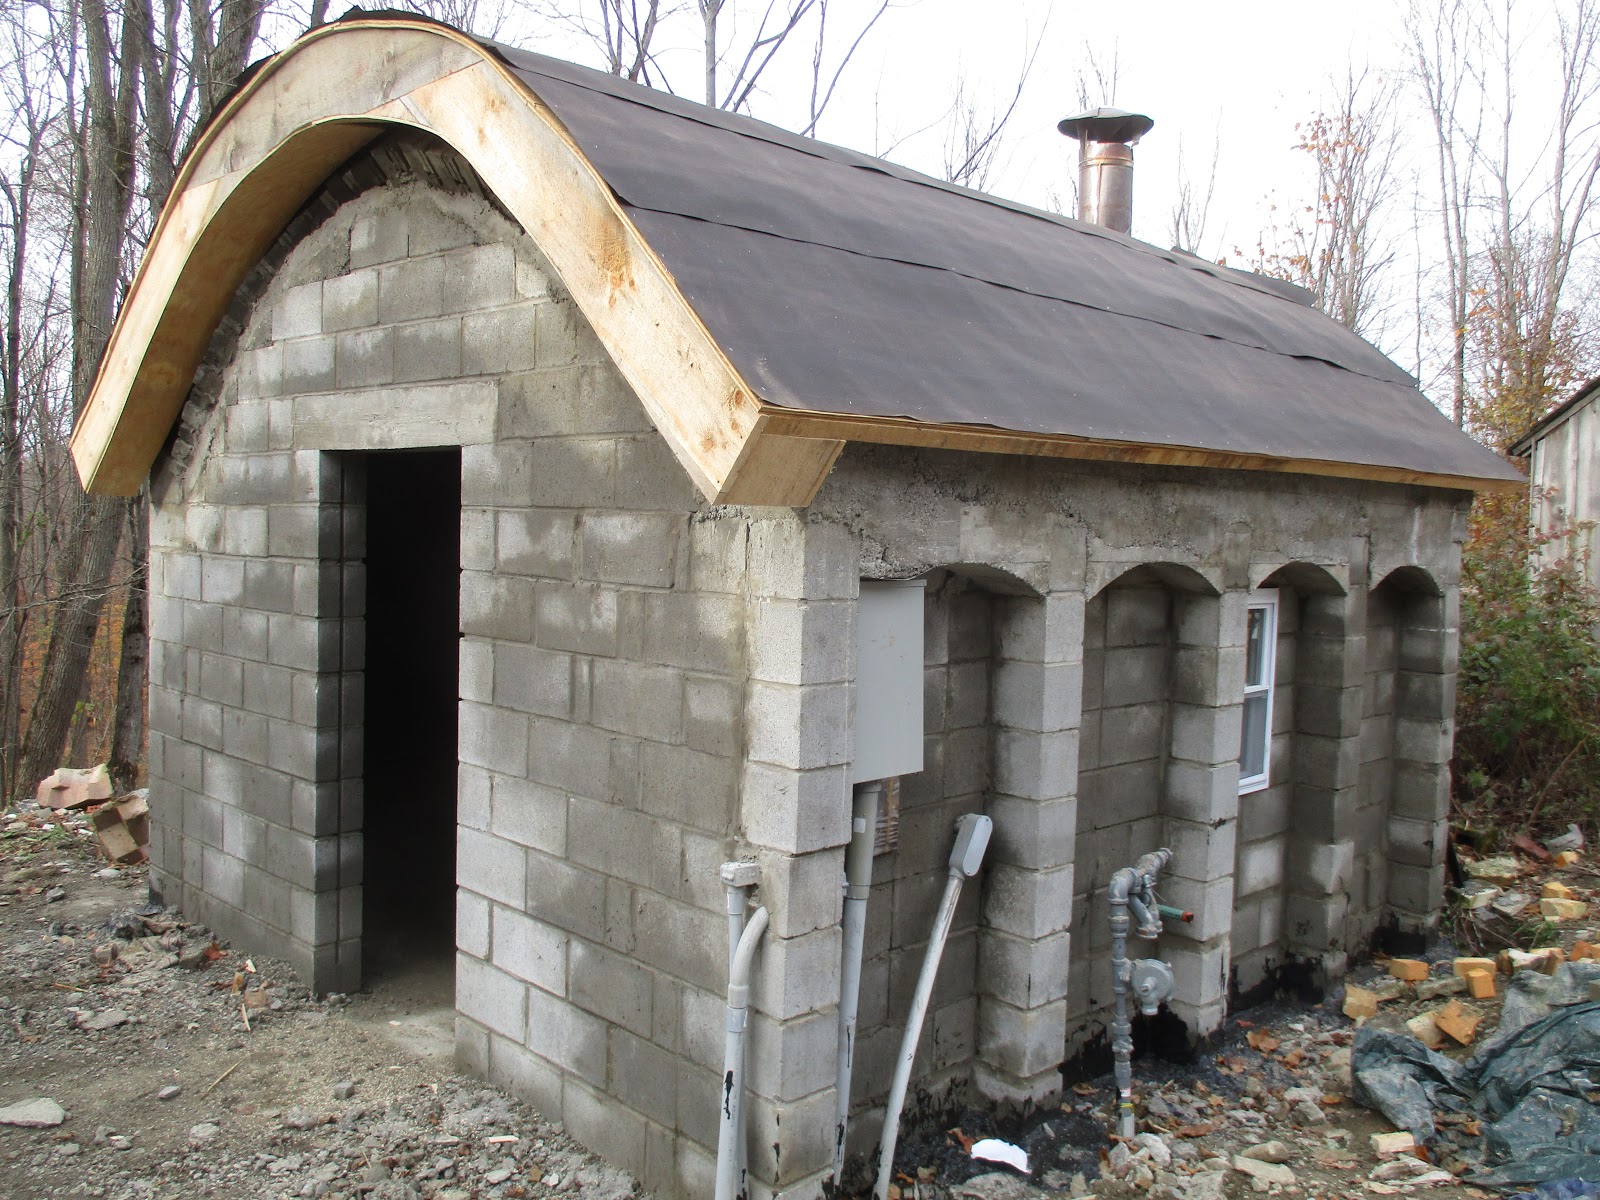 How To Build A Small Cinder Block House | TcWorks.Org